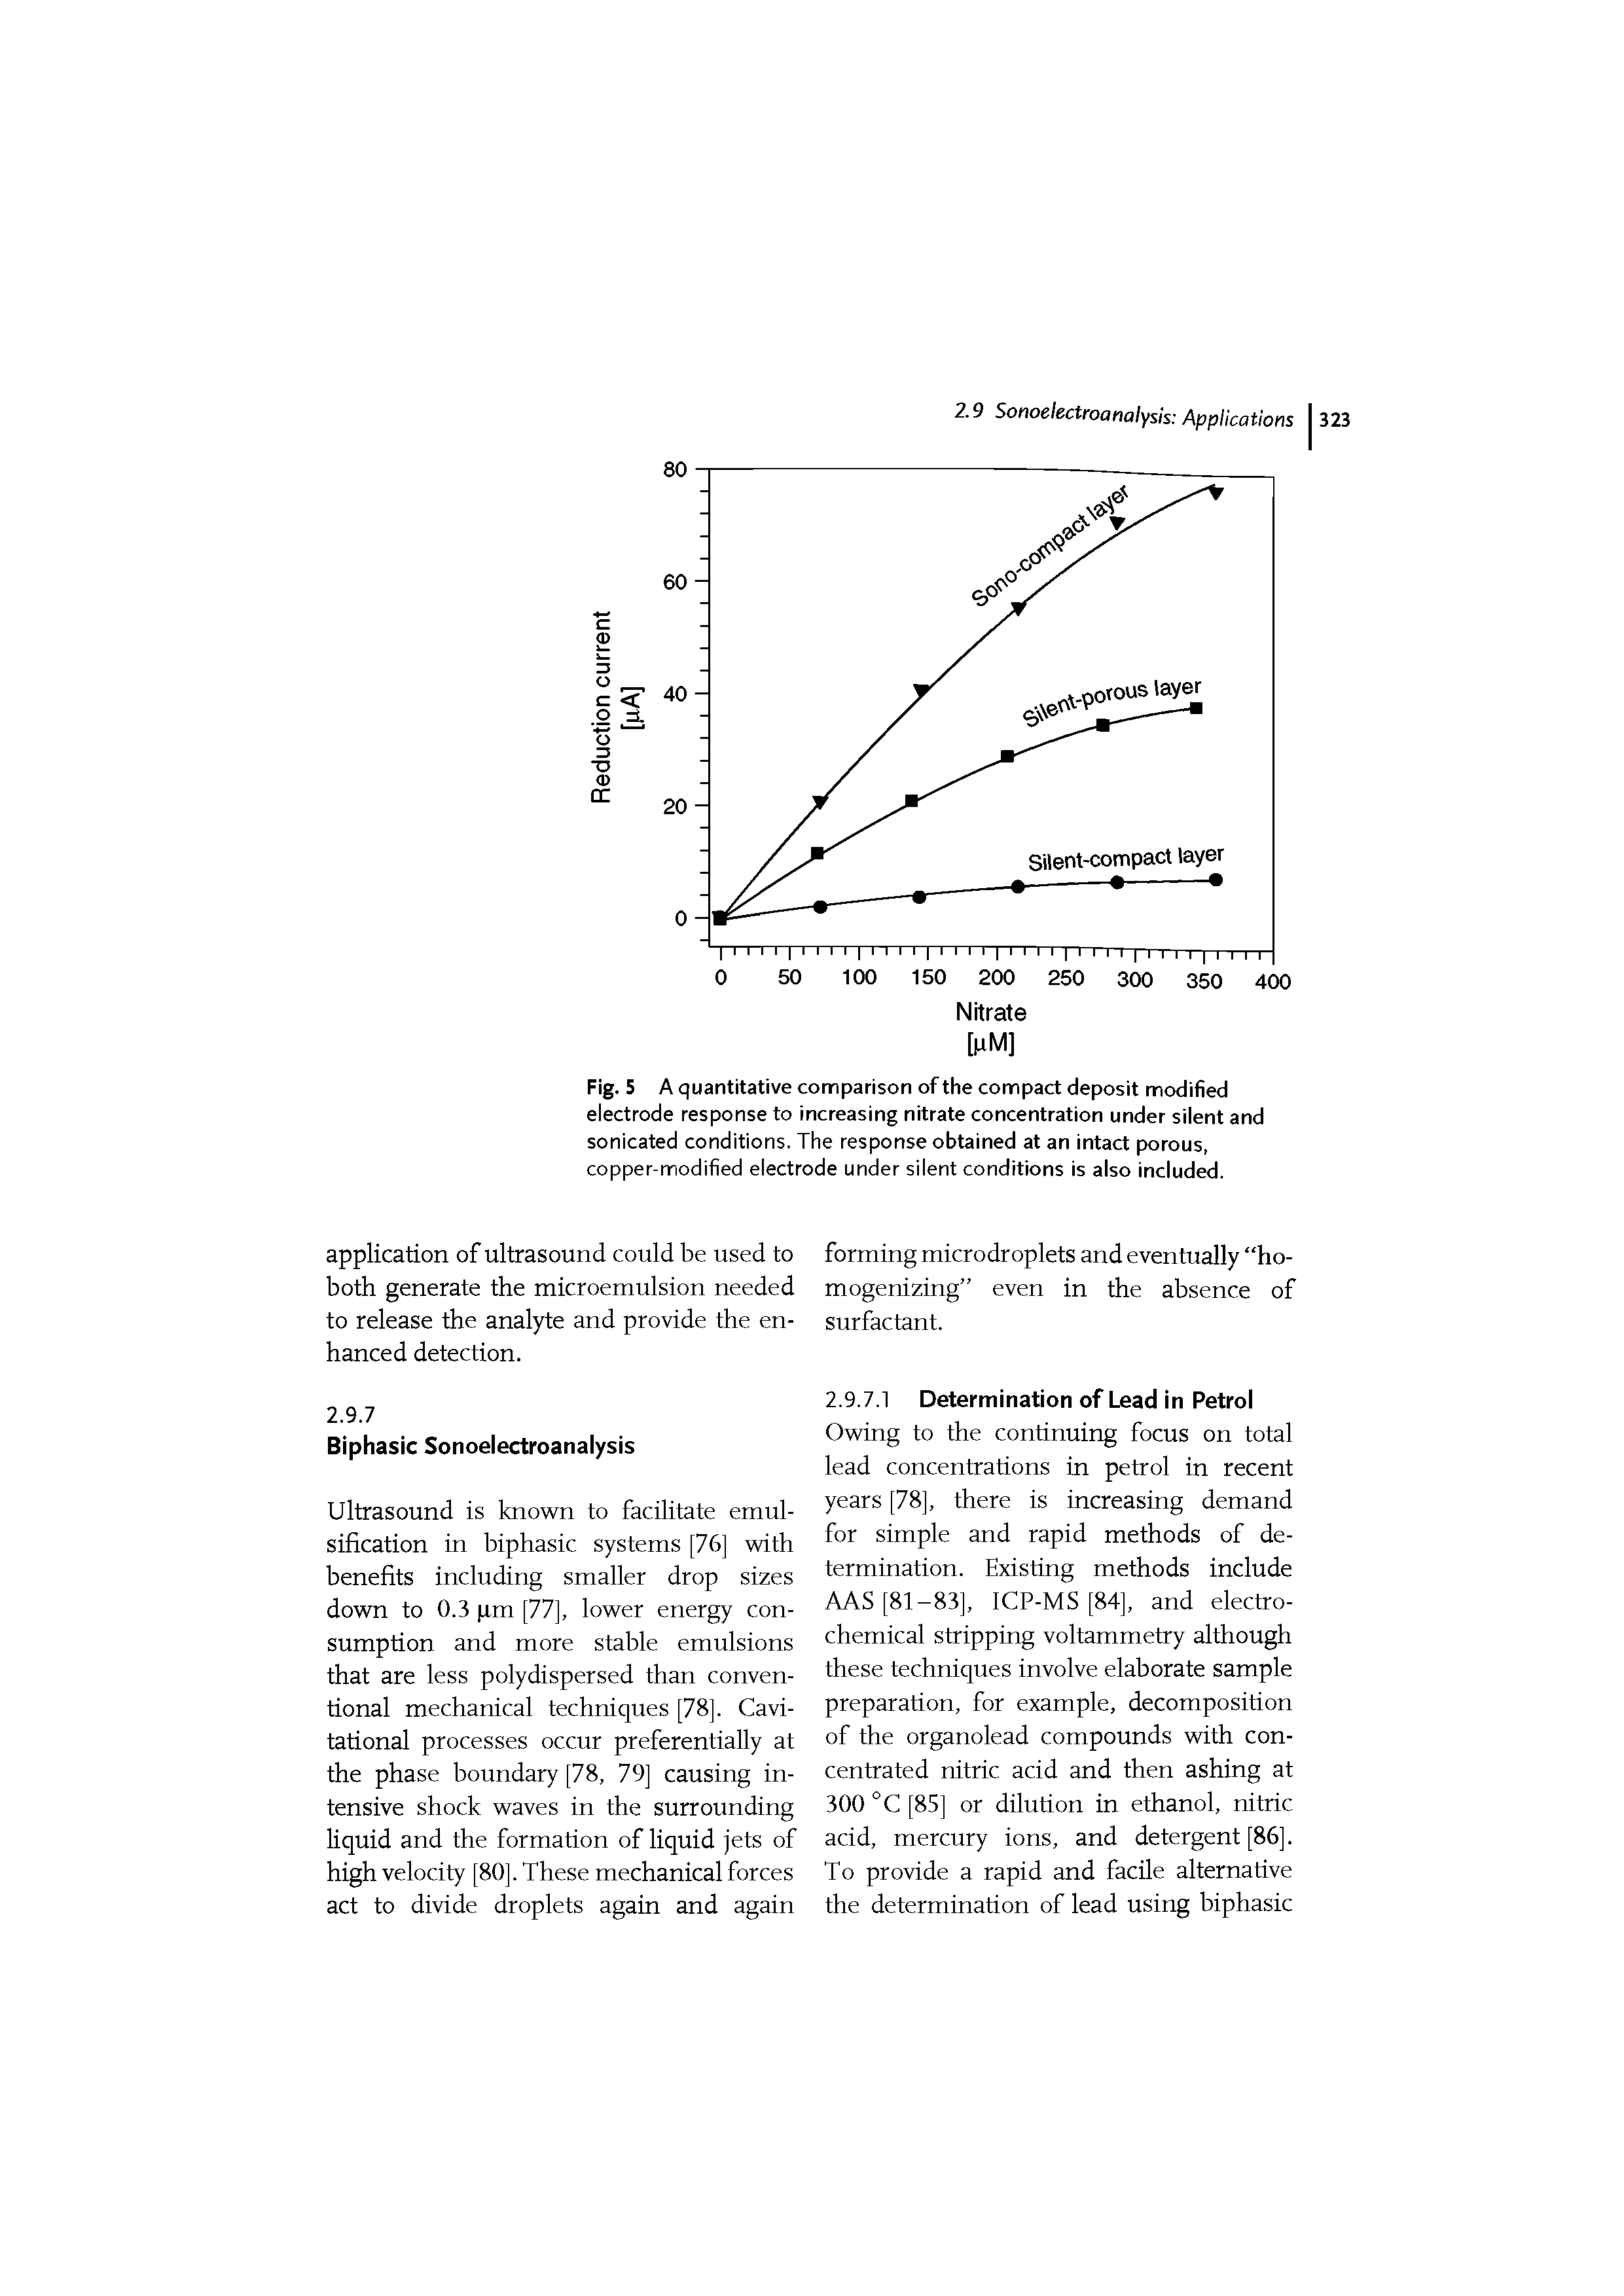 Fig. 5 A quantitative comparison of the compact deposit modified electrode response to increasing nitrate concentration under silent and sonicated conditions. The response obtained at an intact porous, copper-modified electrode under silent conditions is also included.